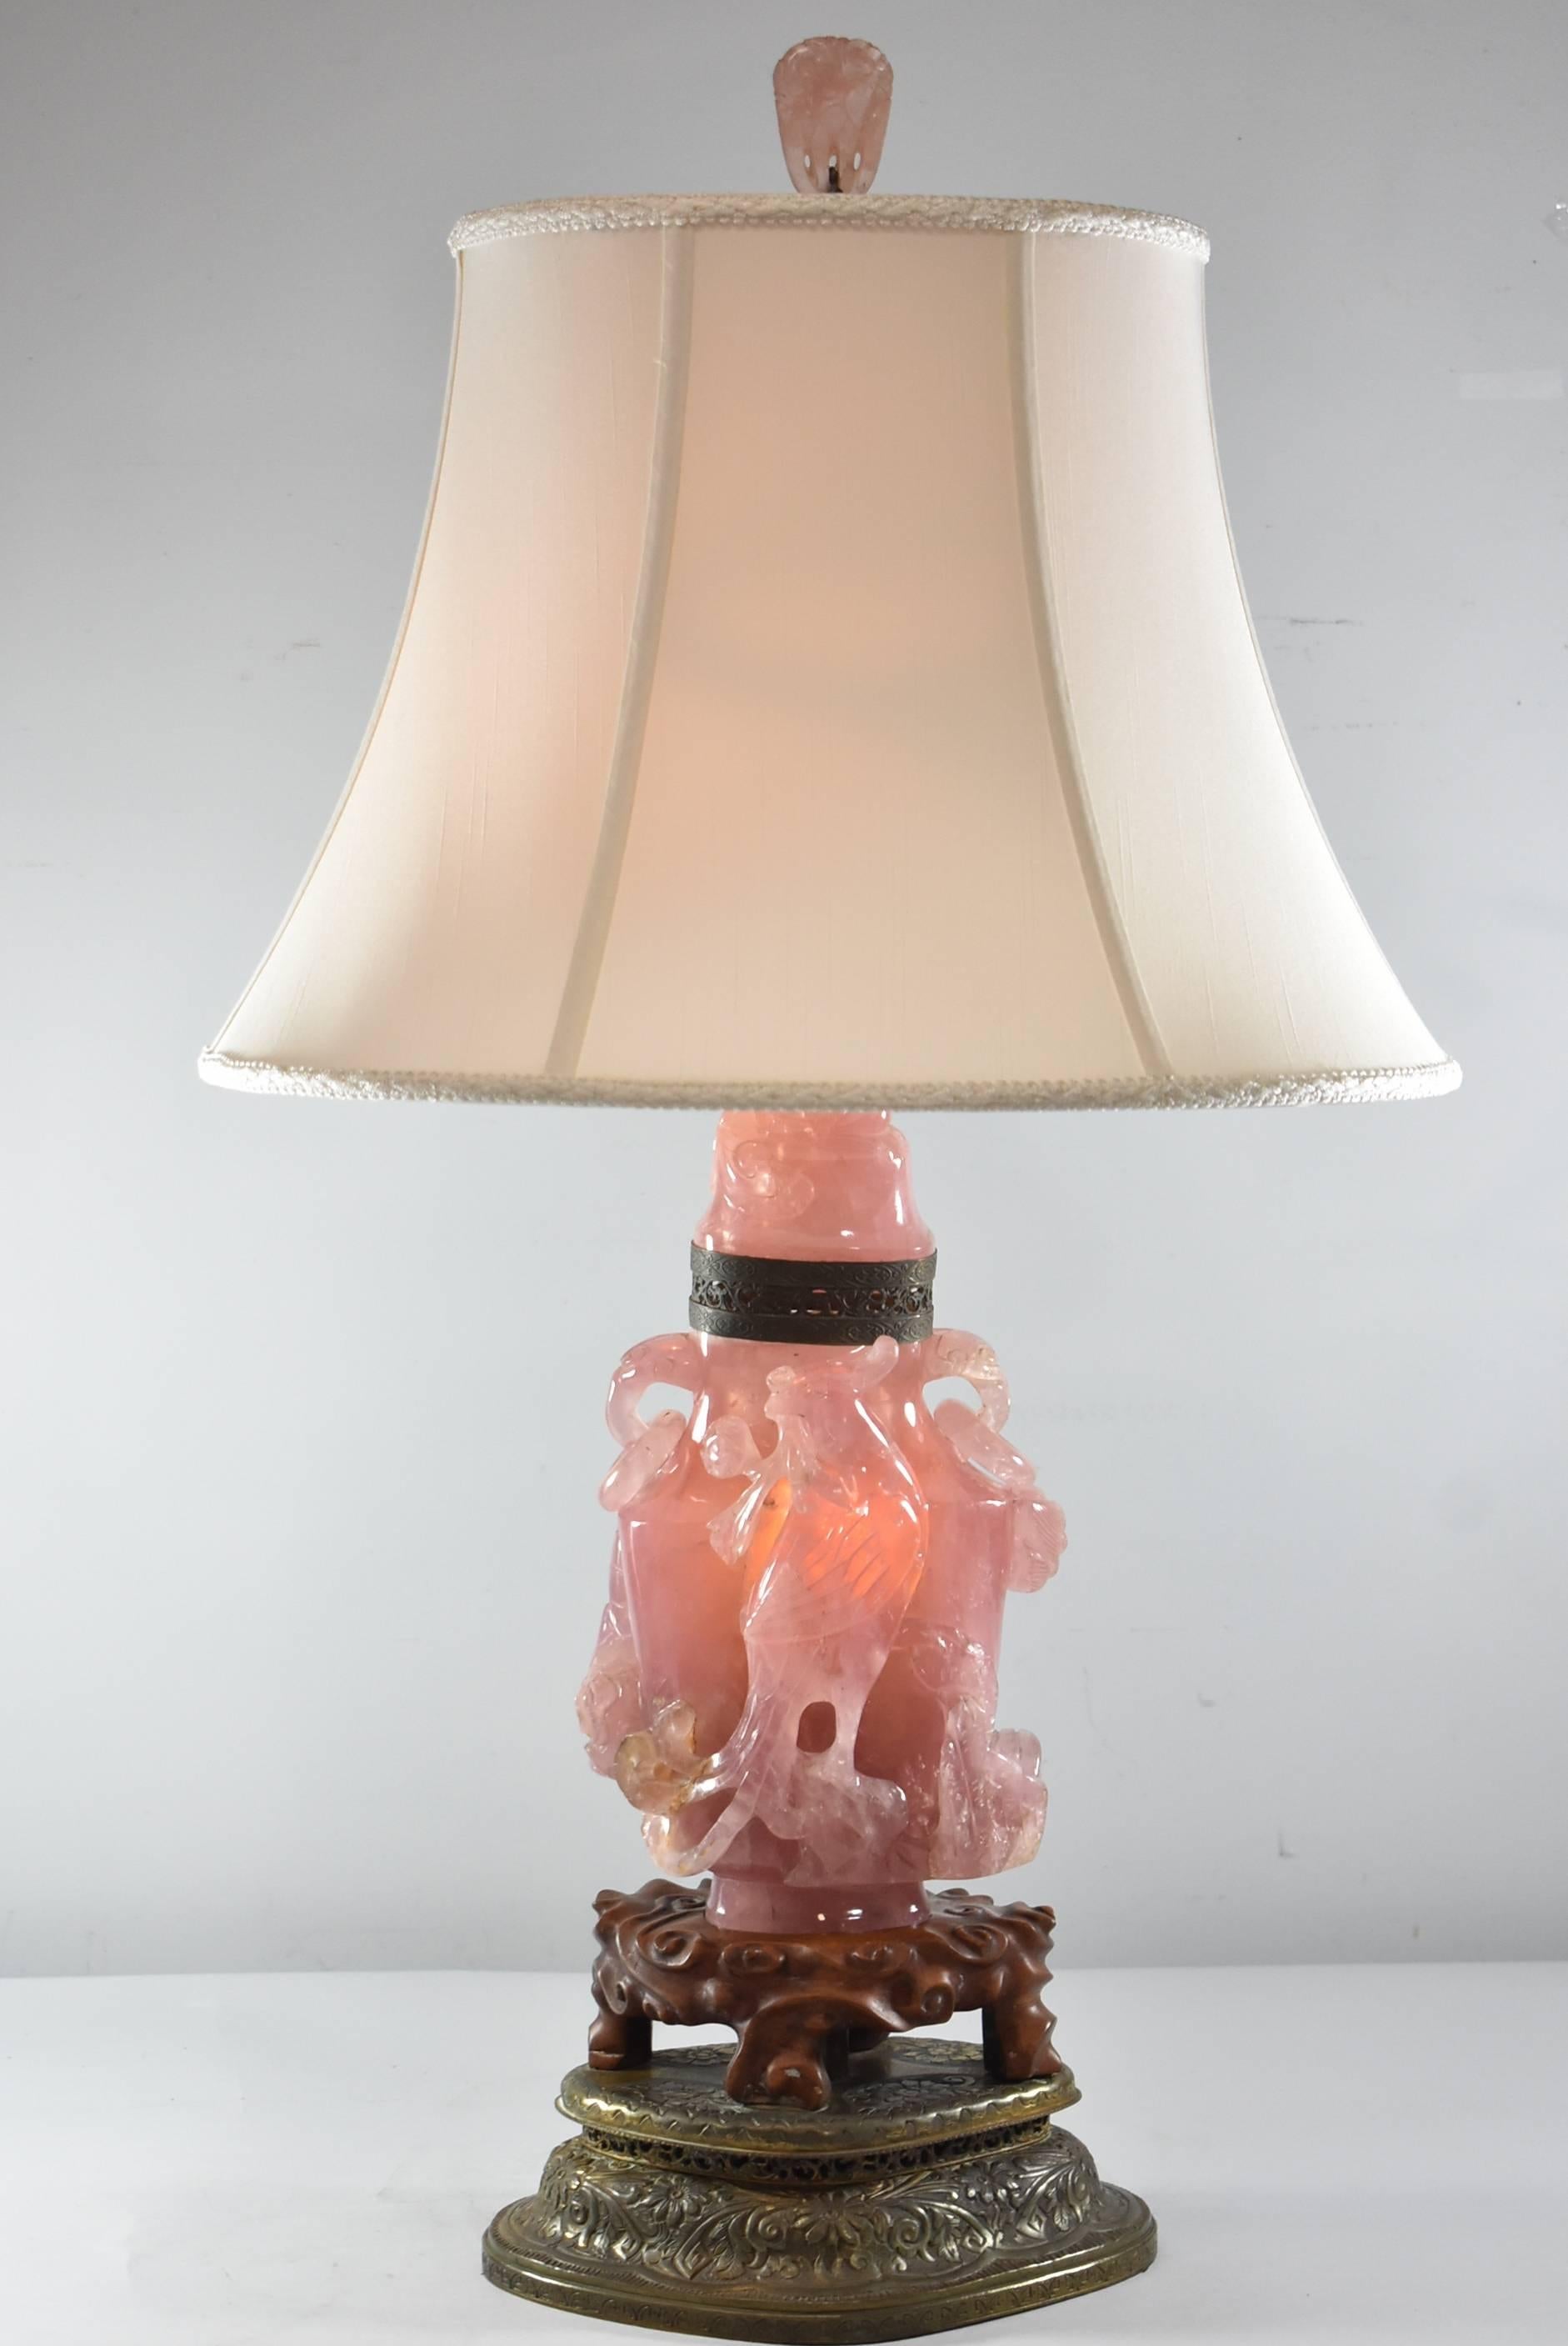 A unique turn of the century Asian rose quartz table lamp. Statue is fixed to a teak wood base which sits atop an embossed, impressed and shaped brass Stand with floral motif. The light is lit by two sockets with pull chains. Wiring is good.